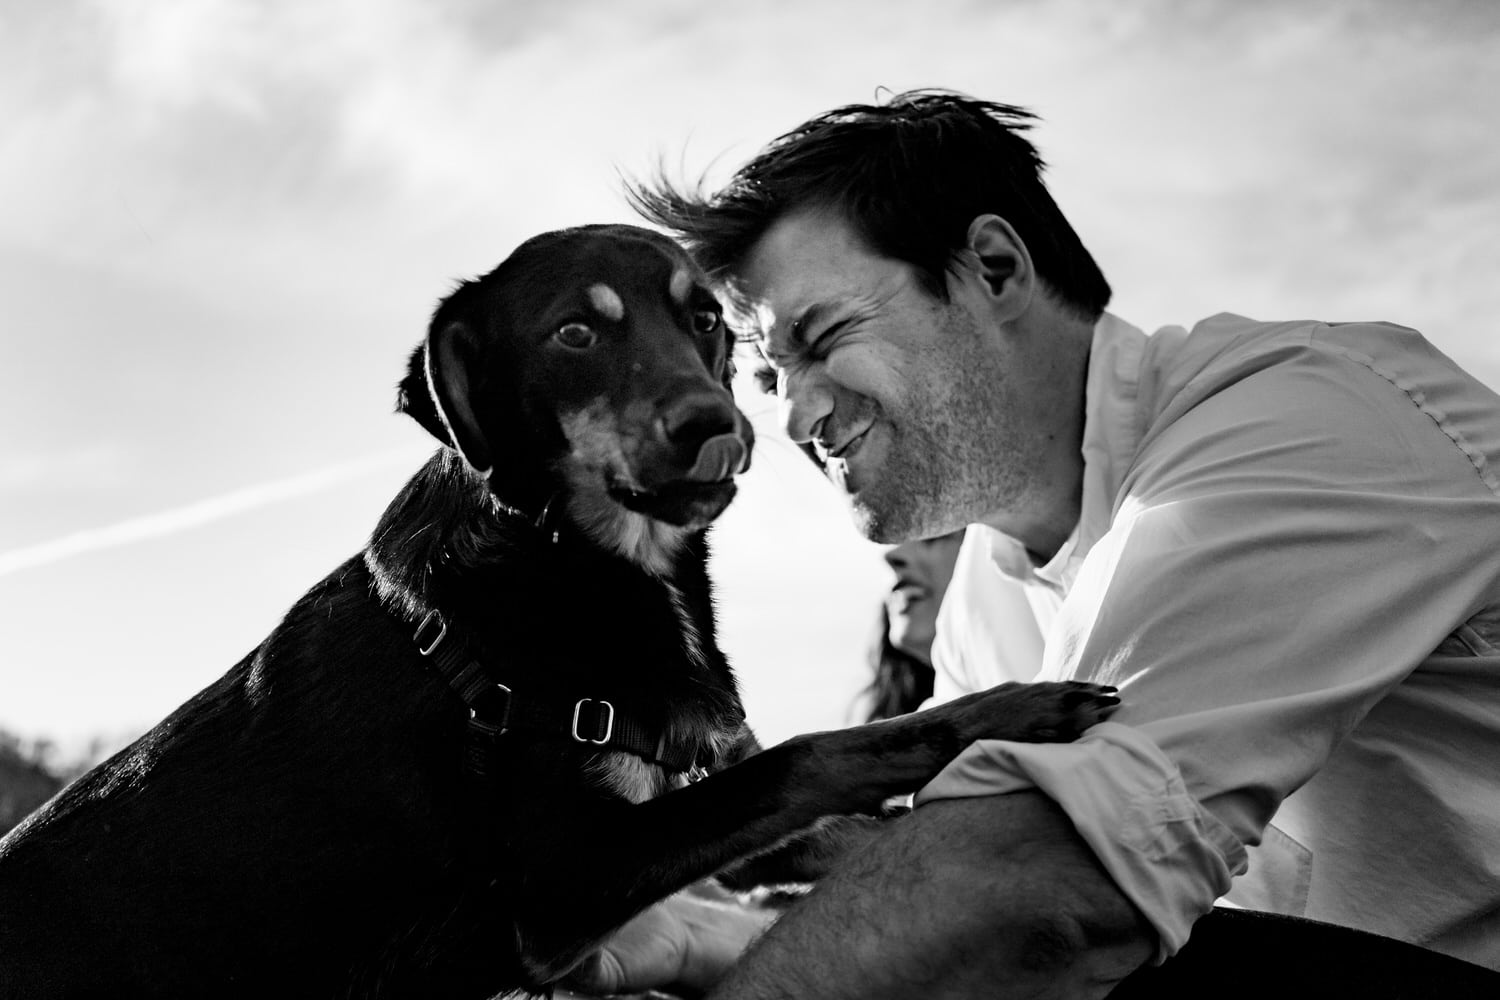 A candid black and white picture of a dog licking his tongue seconds after licking a man's face as the man grimaces in the background. 